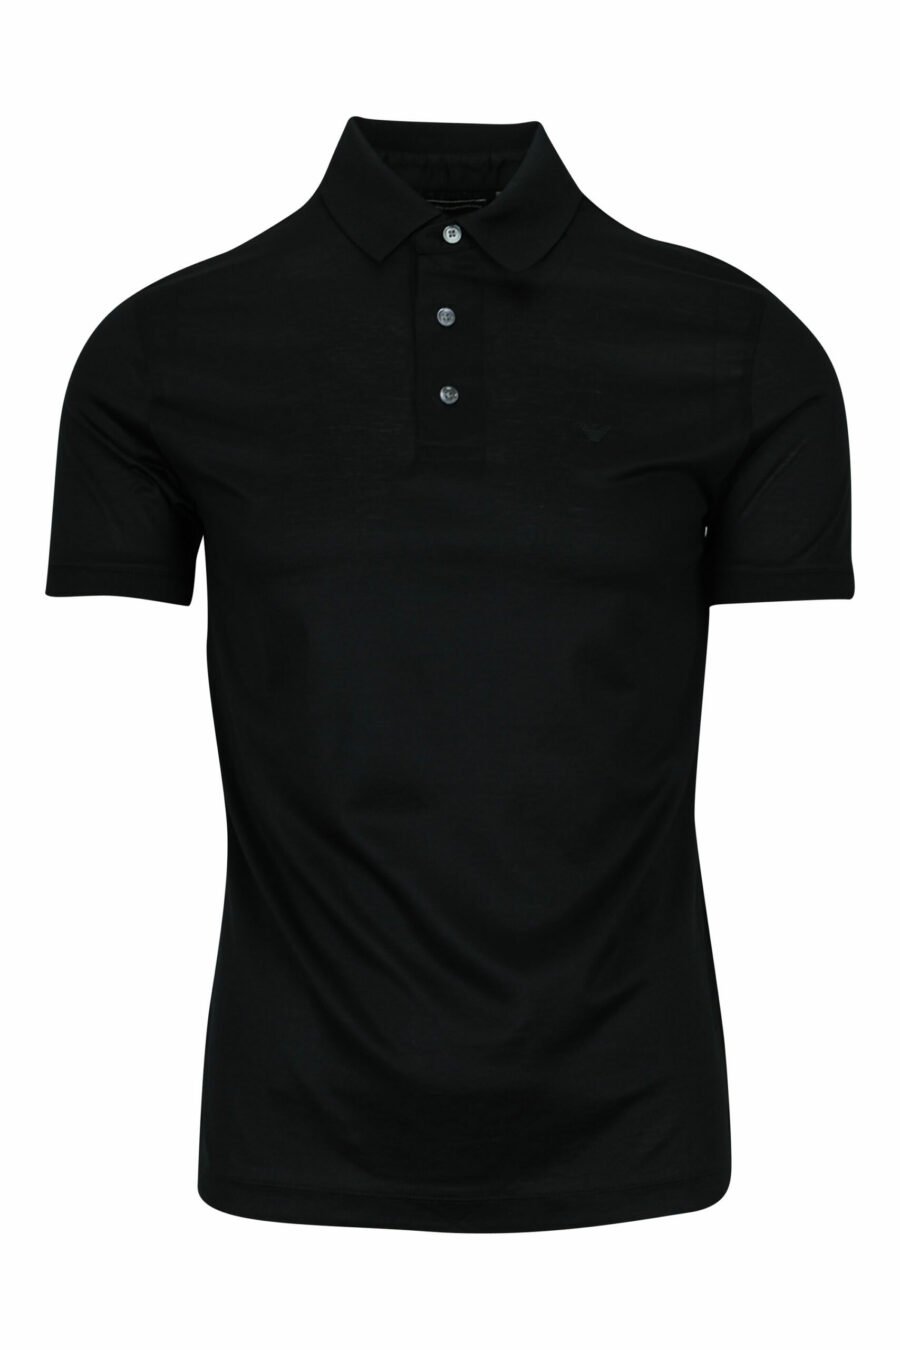 Black knitted polo shirt with eagle mini logo - 8059516405610 scaled